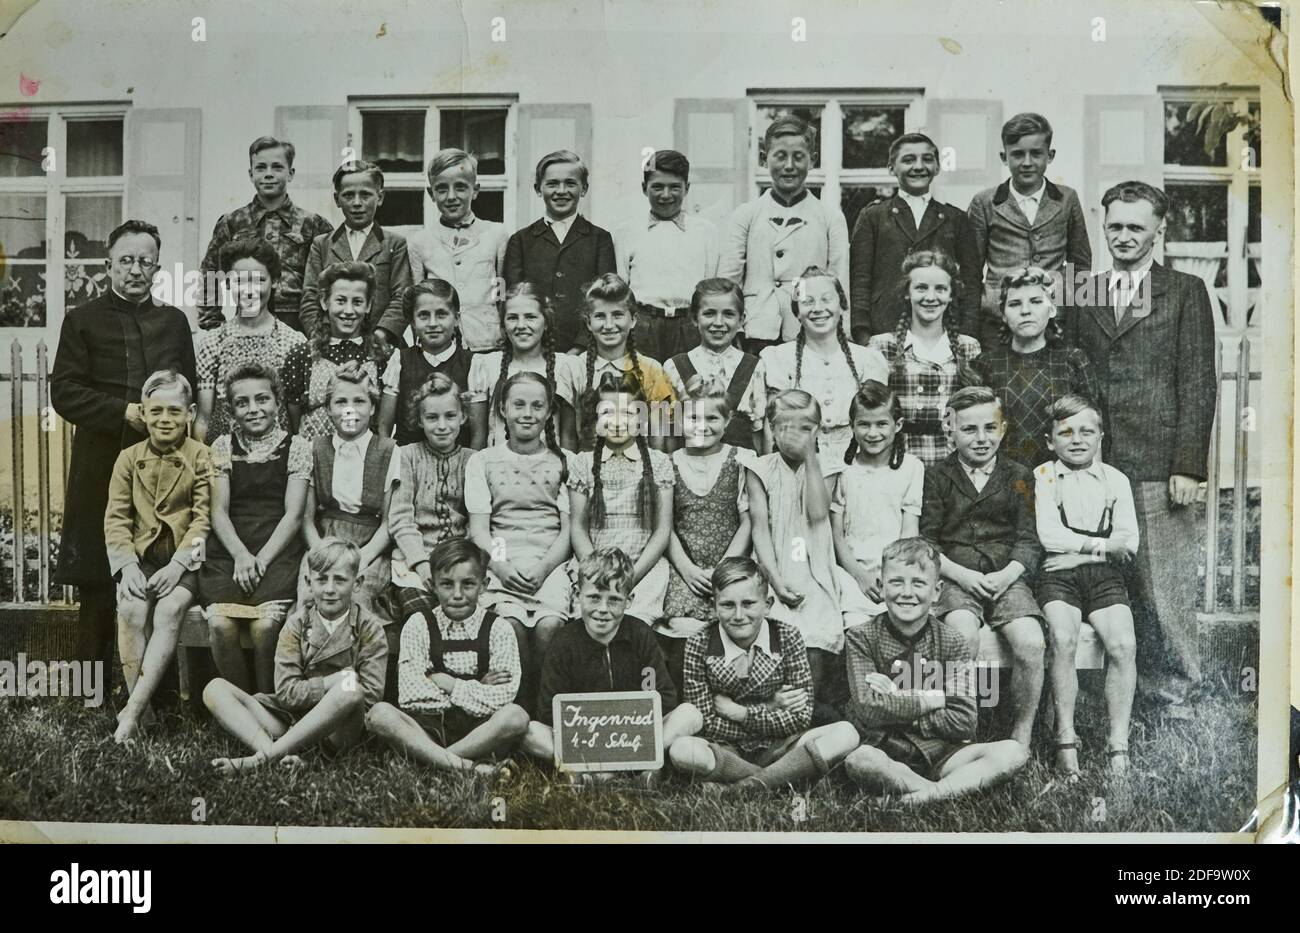 Historical Photo:  Class photo in Ingenried, Bavaria, Germany 1950. Reproduction in Marktoberdorf, Germany, October 26, 2020.  © Peter Schatz / Alamy Stock Photos Stock Photo